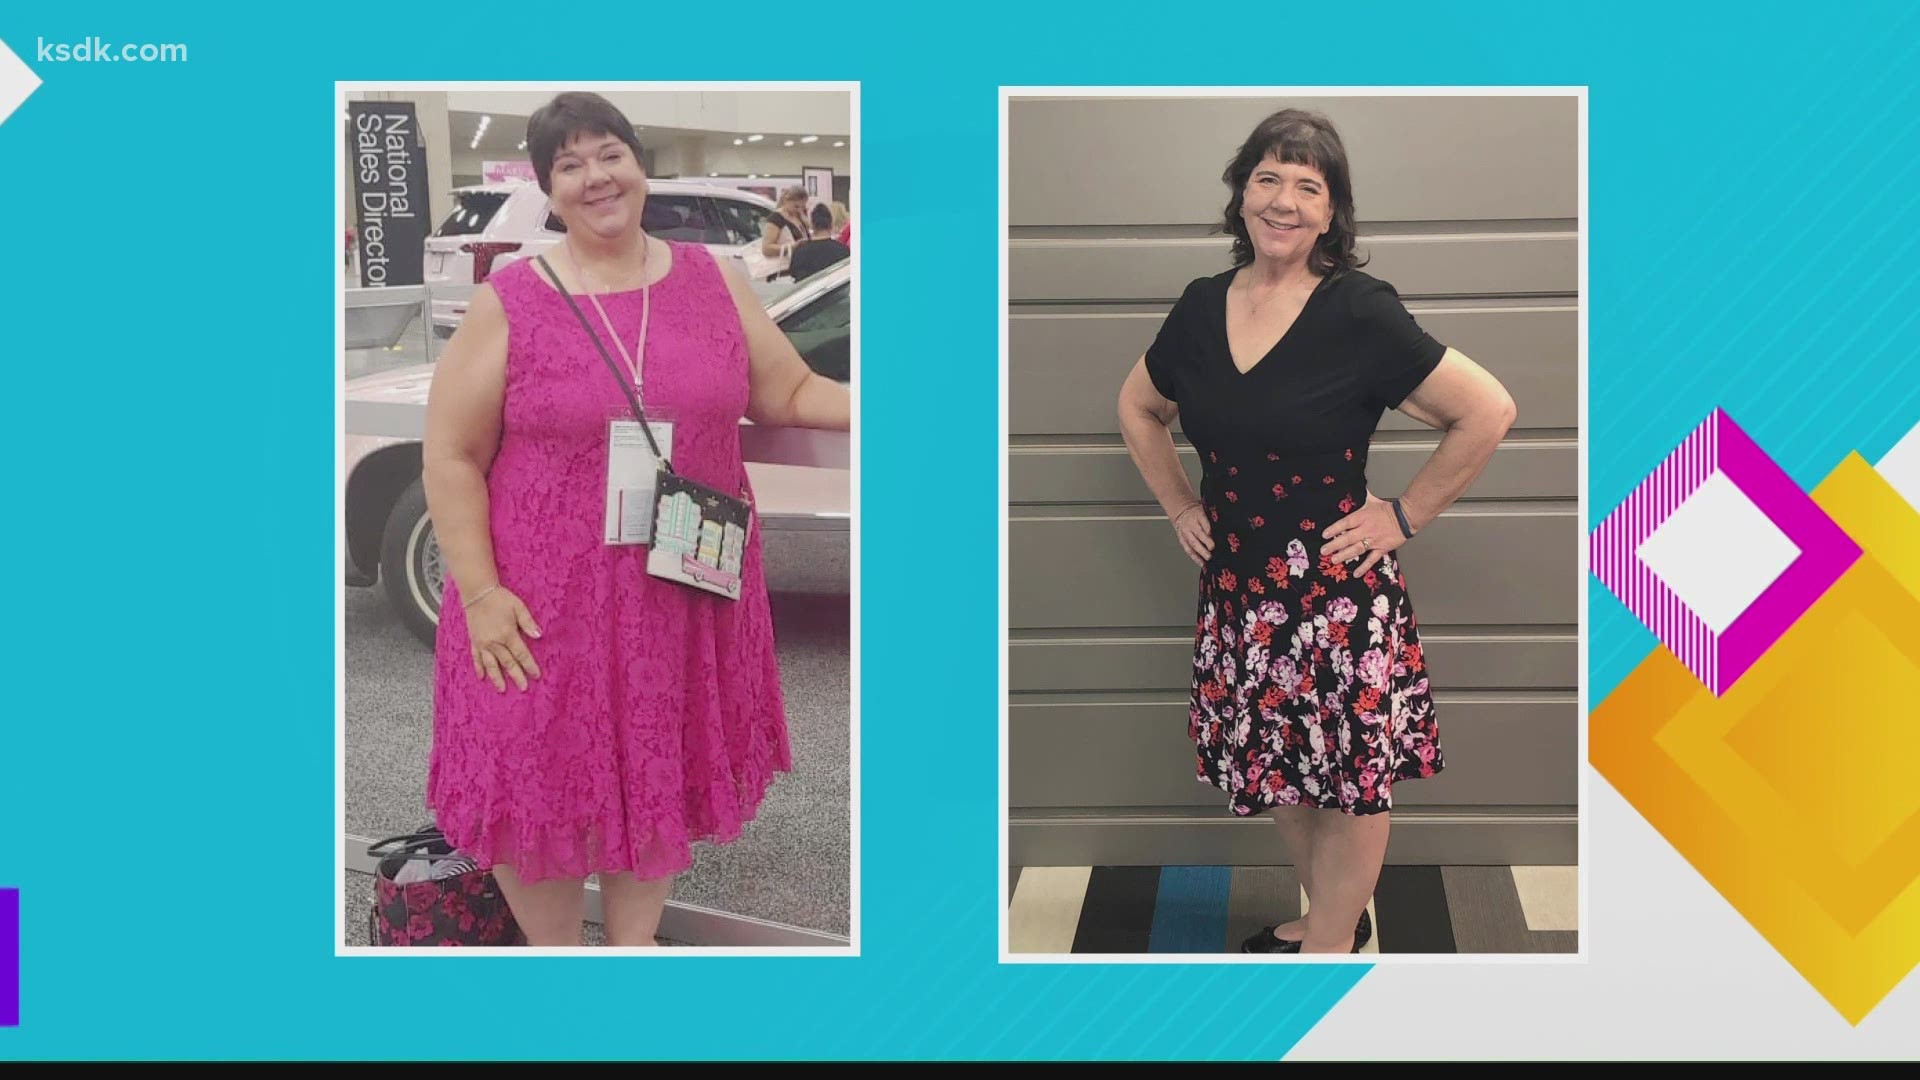 Marion was able to meet her wellness goal with the help of Charles D’Angelo.